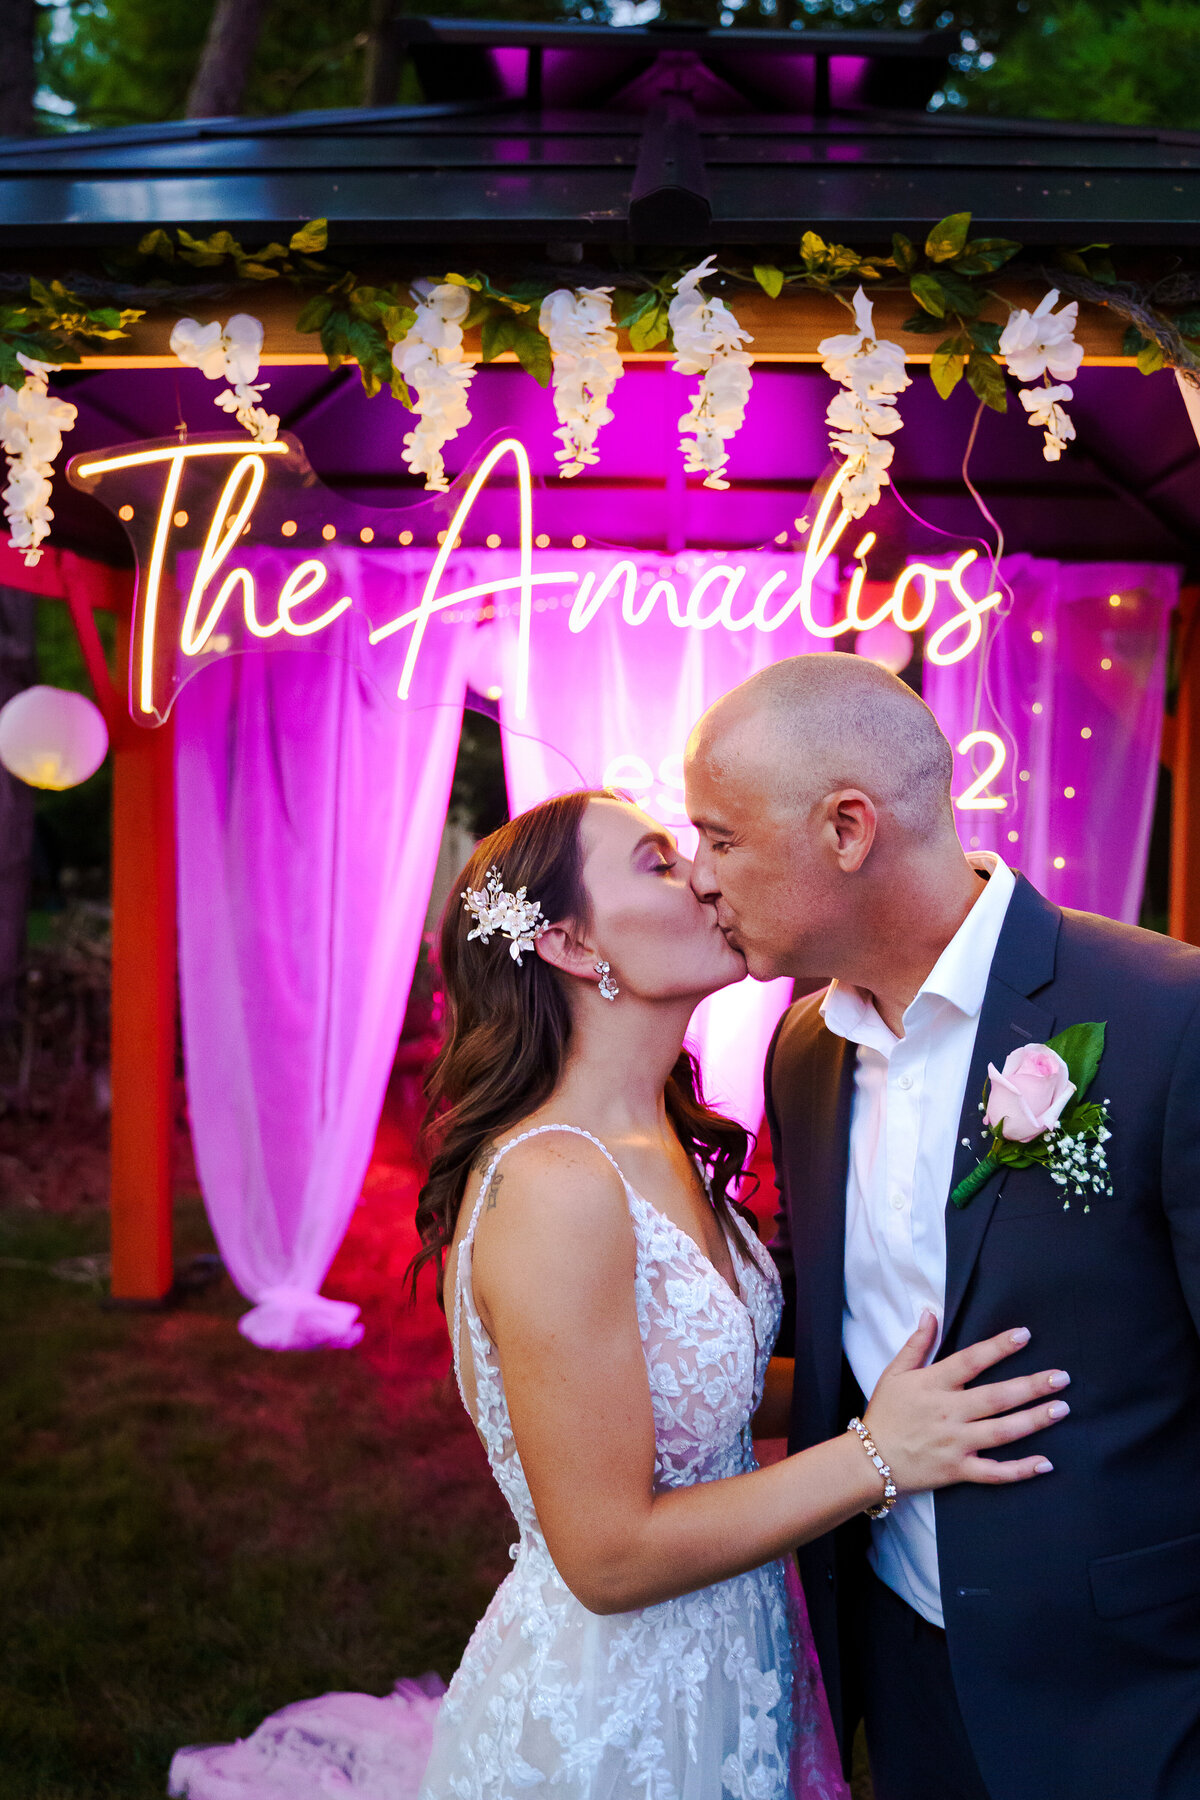 Bride and groom kiss in front of a neon sign and gazebo at night at their backyard wedding in Dublin, Ohio.